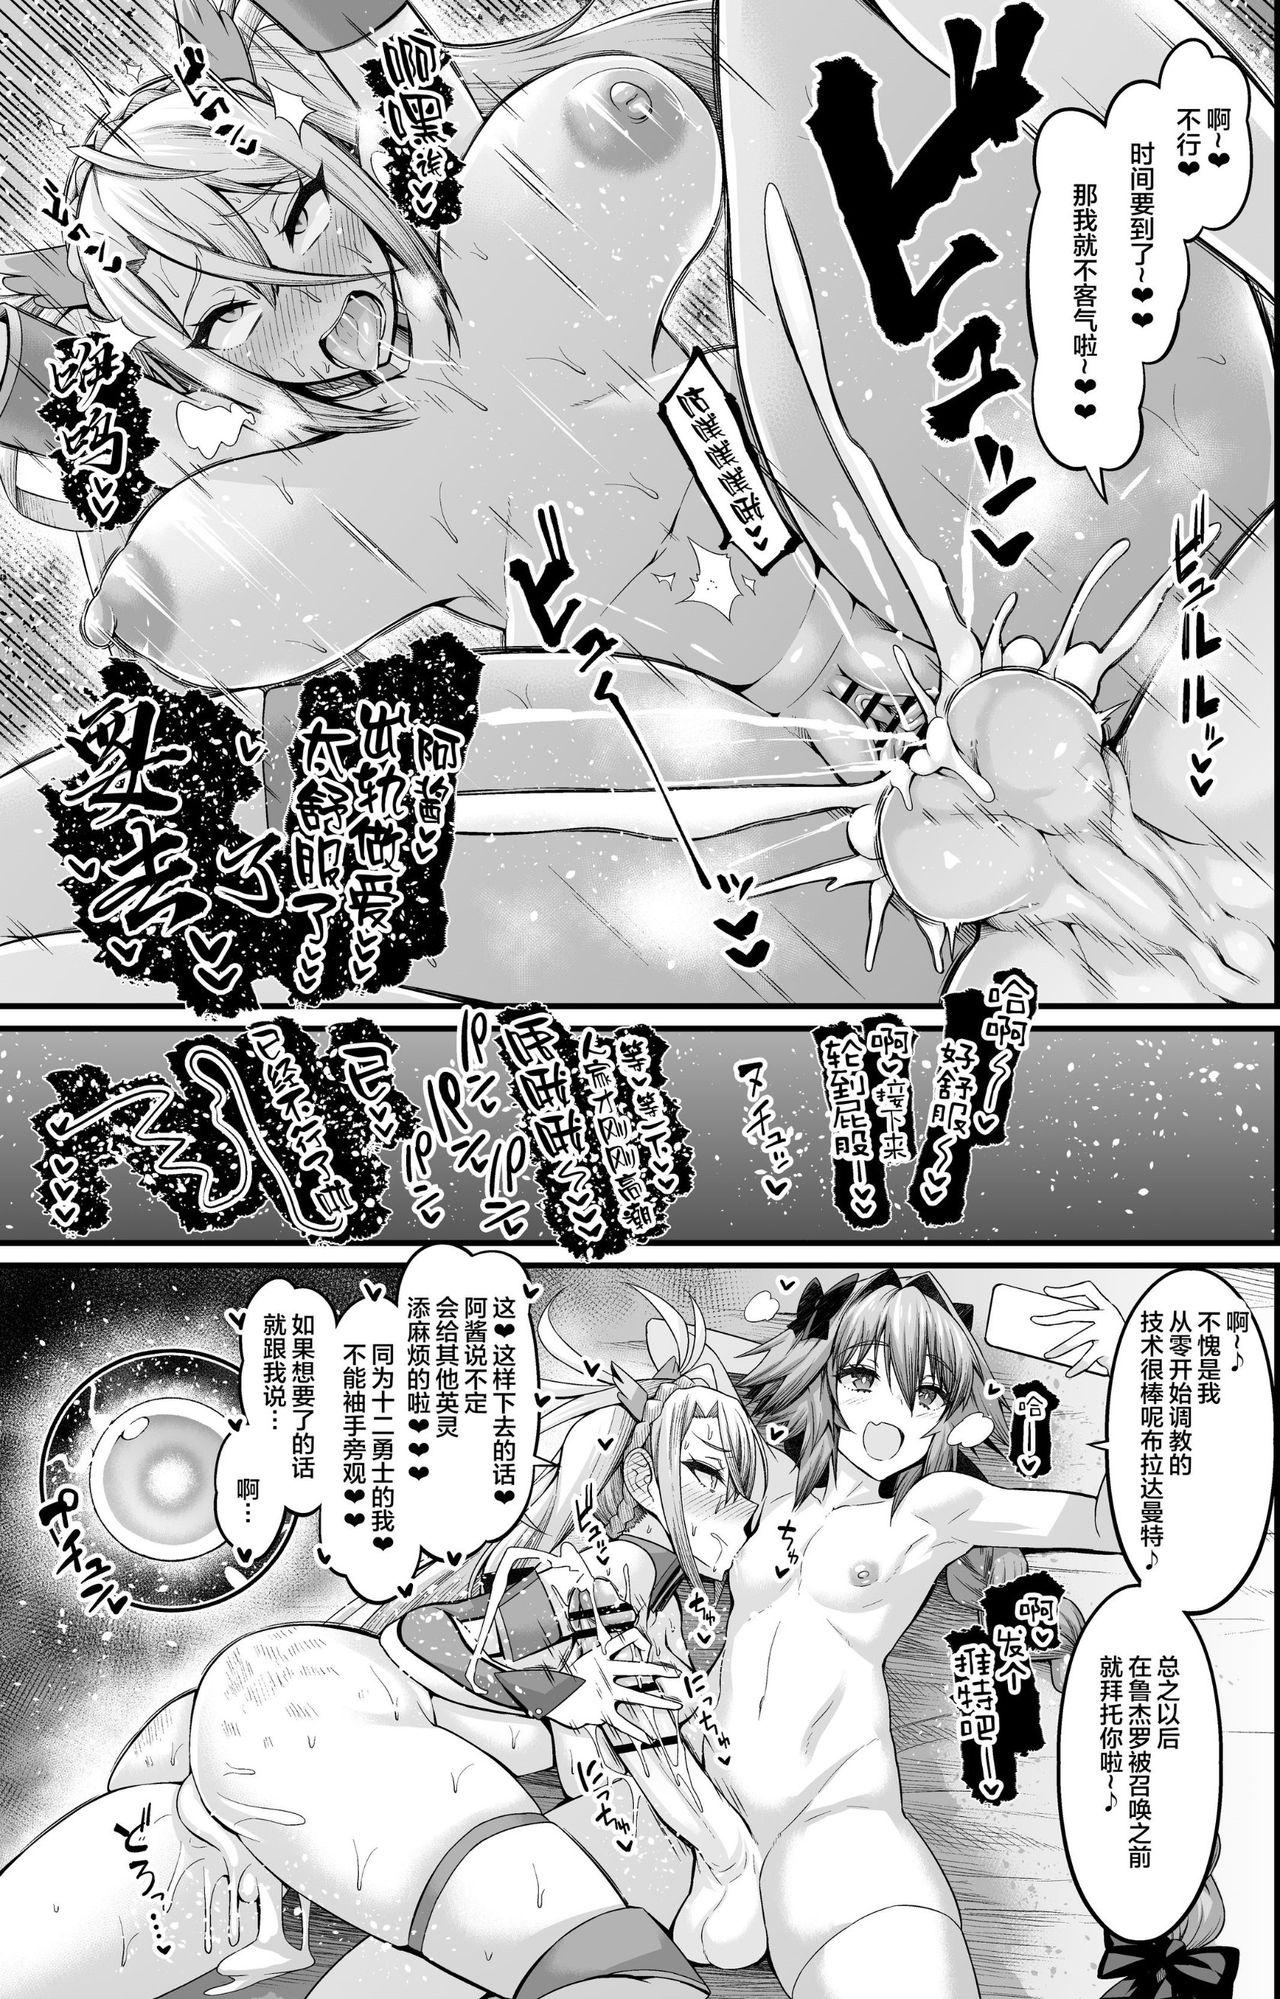 Tranny Sex Ankoman collection - Fate grand order Group Sex - Page 8